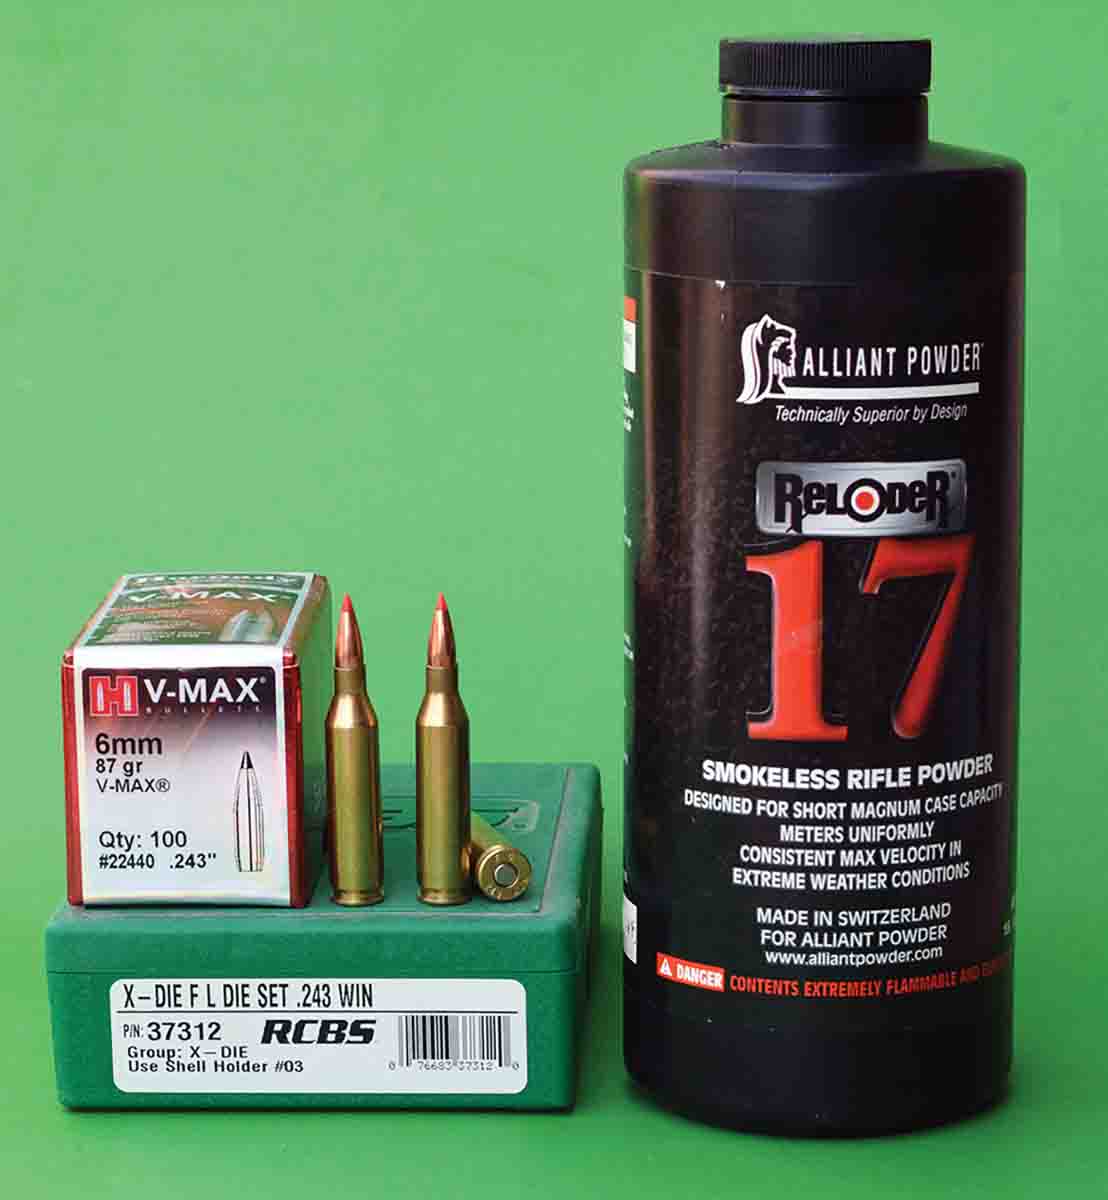 Alliant Reloder 17 powder is an excellent choice for the .243 Winchester when it is used in conjunction with Hornady 87-grain V-MAX bullets.